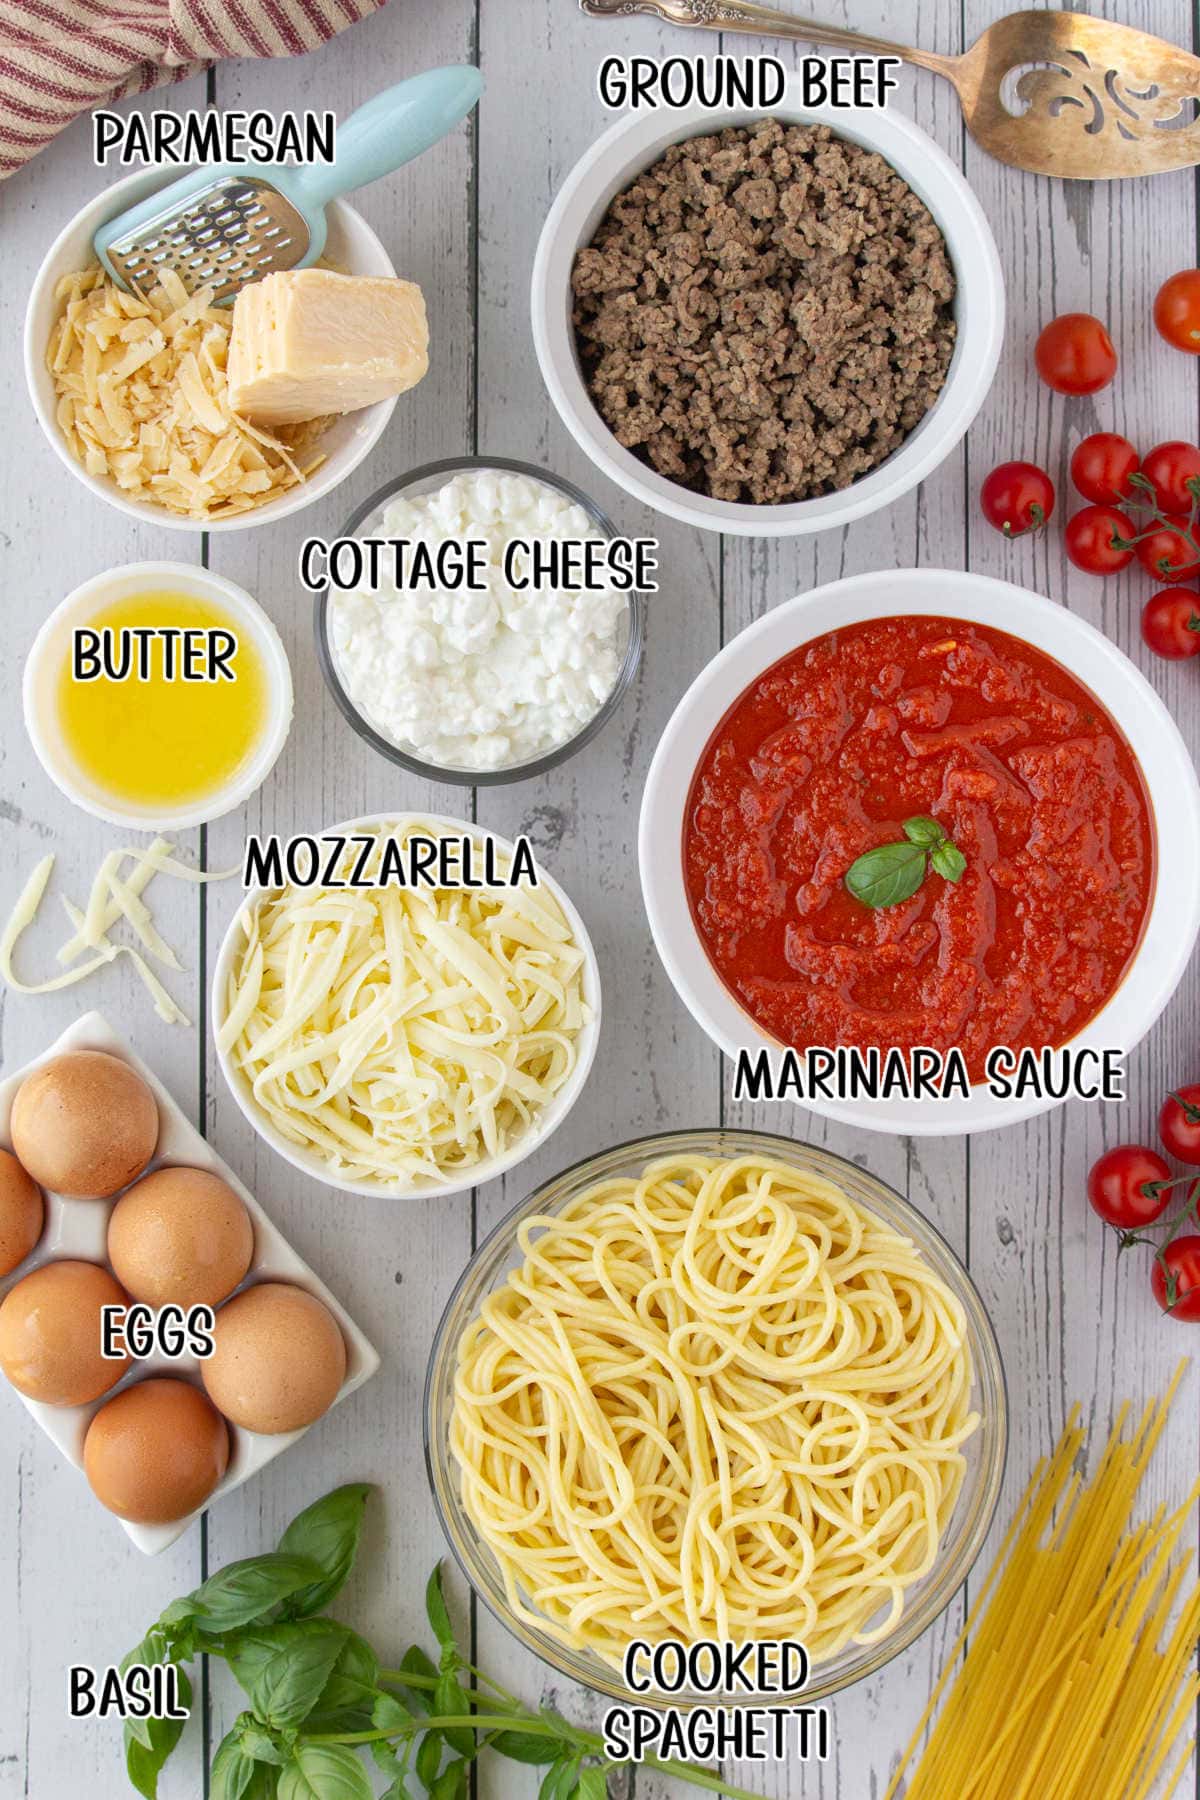 Labeled ingredients for this spaghetti pie recipe.